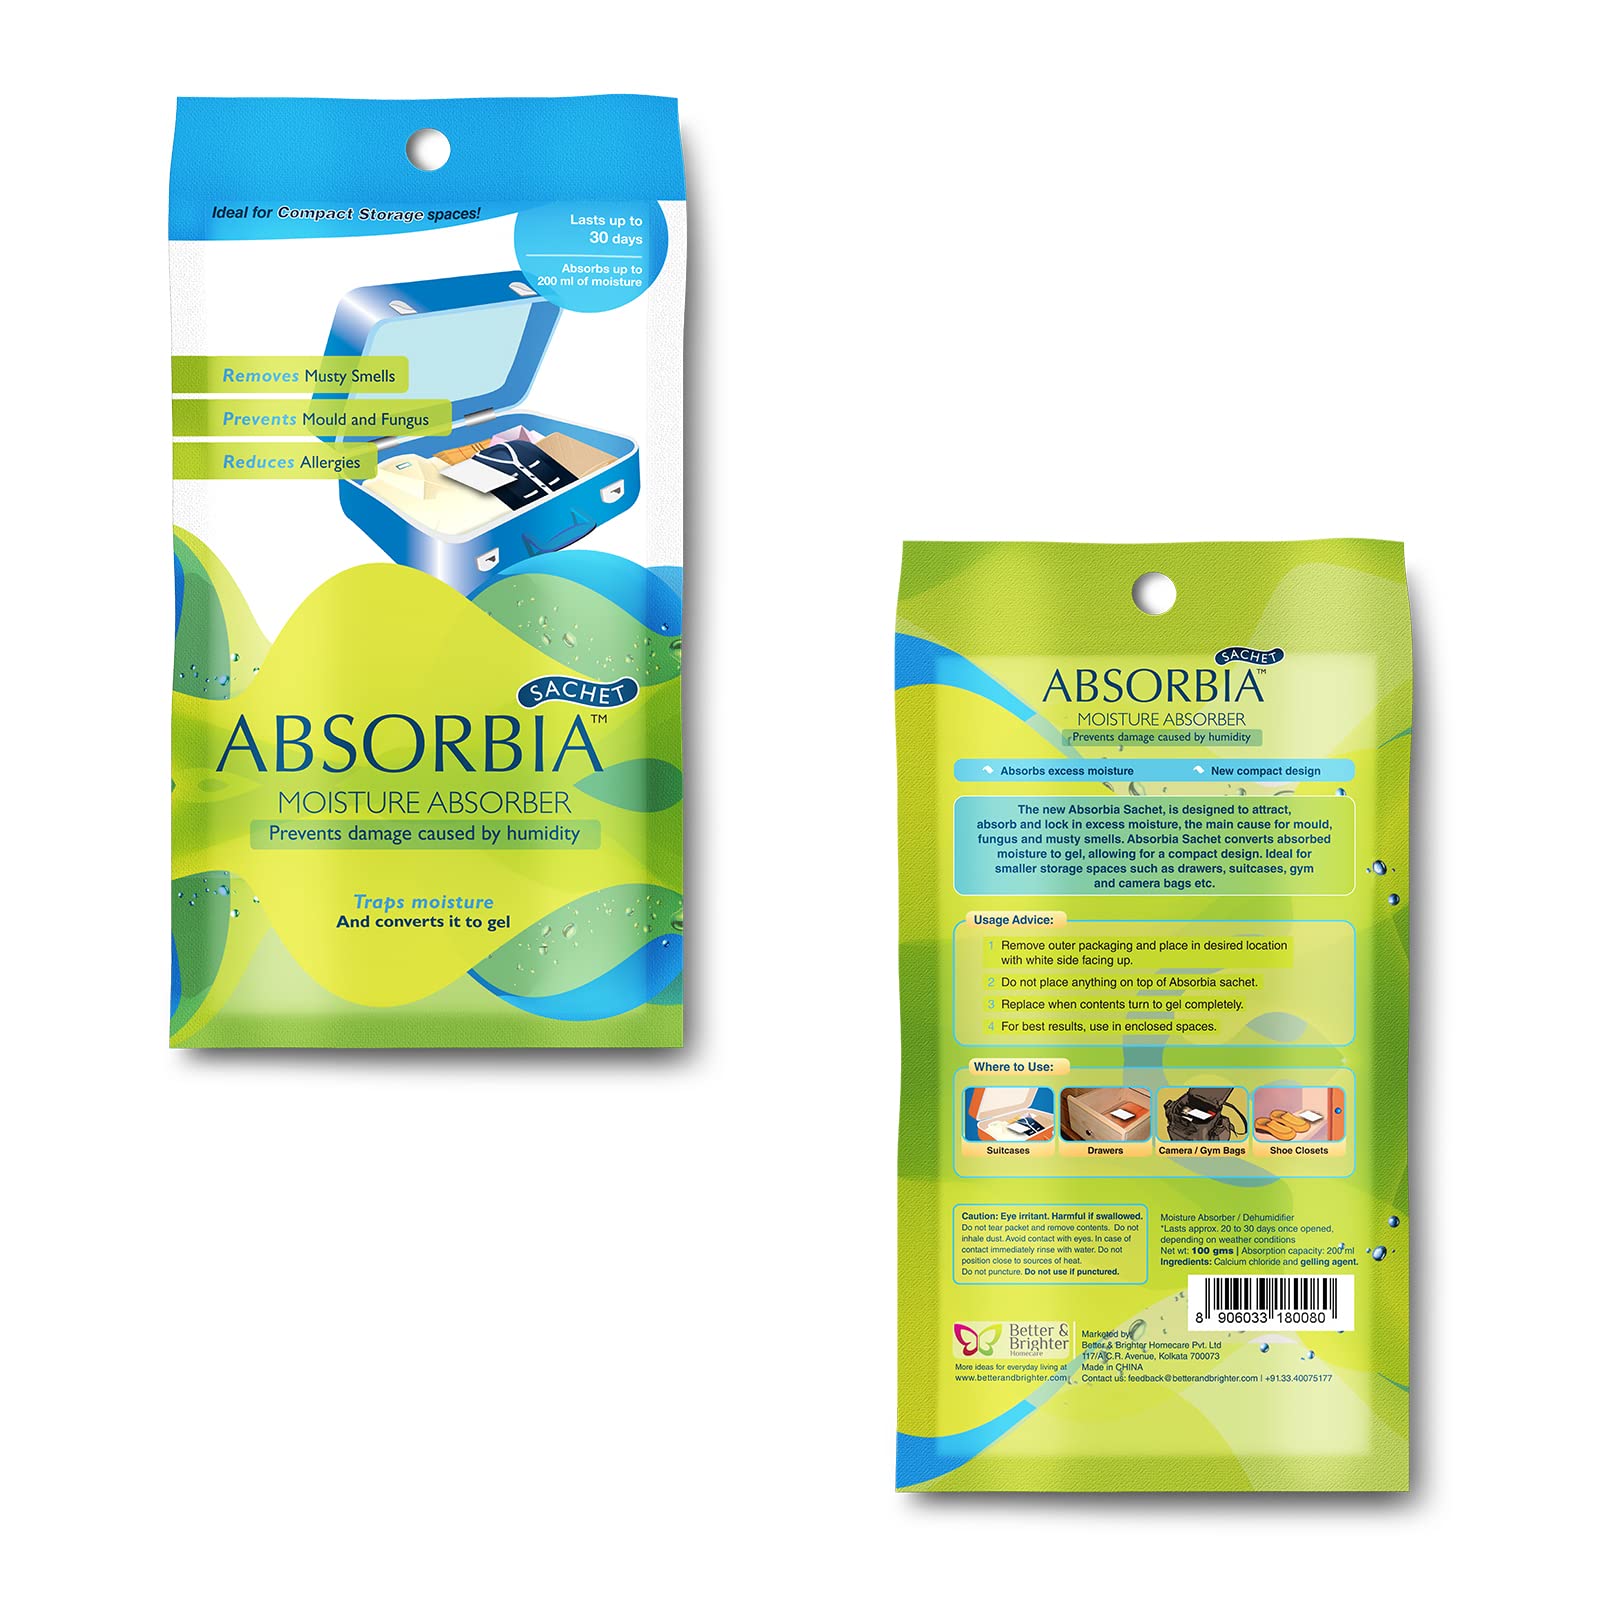 Absorbia Moisture Absorber| Absorbia Sachet(100g X 3 Sachet) - Family Pack  of 3 |Absorbs 200ml Each | Dehumidier for Bags, Suitcases & Drawers 